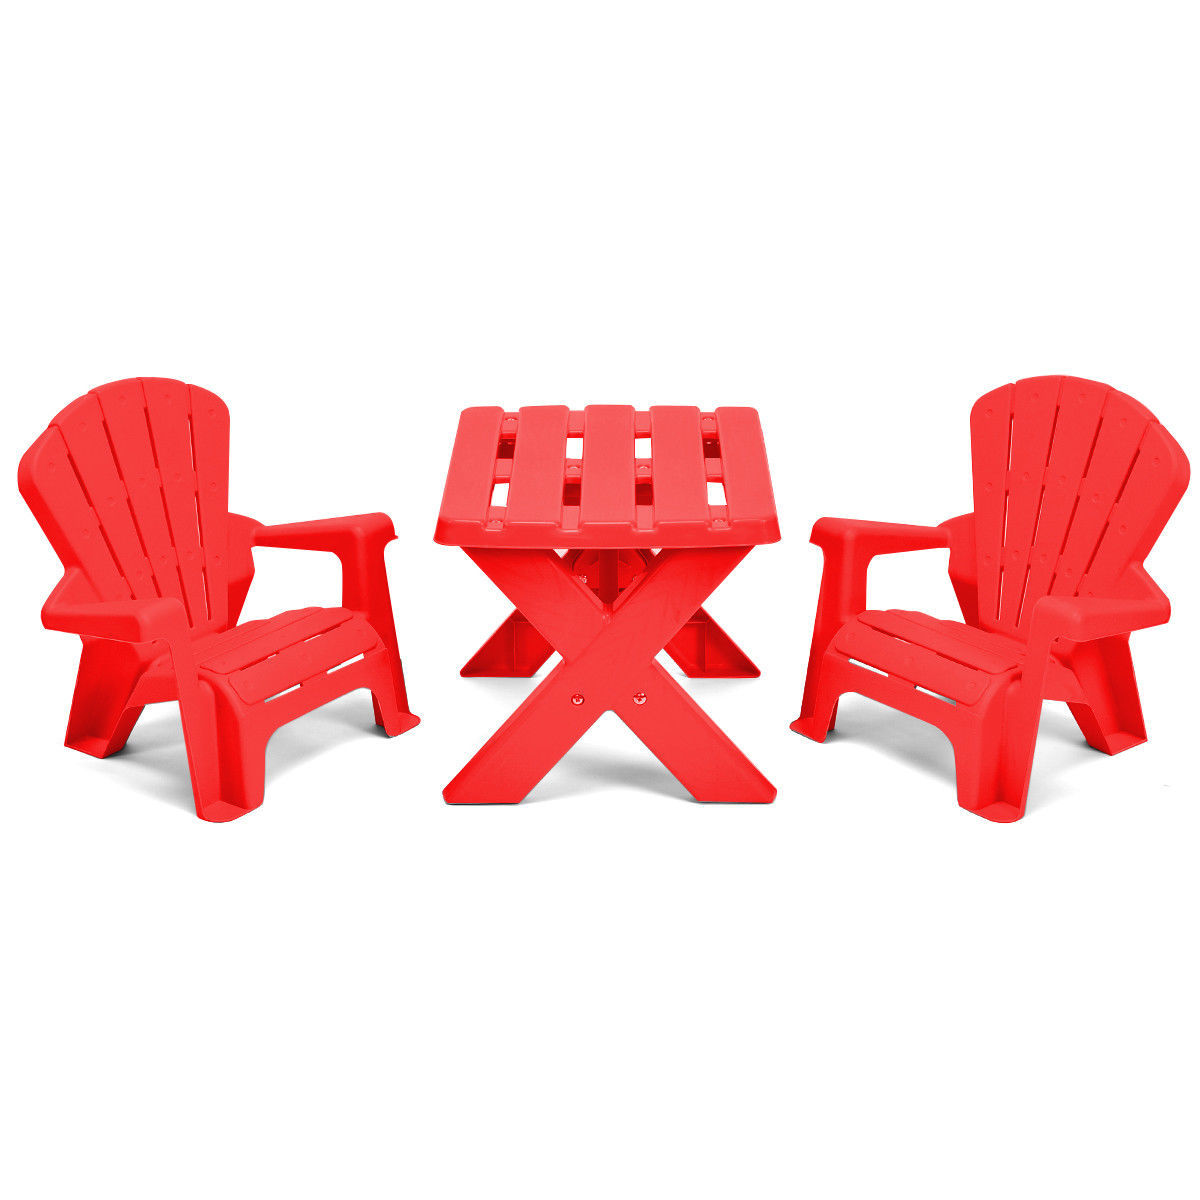 kmart childrens table and chair sets